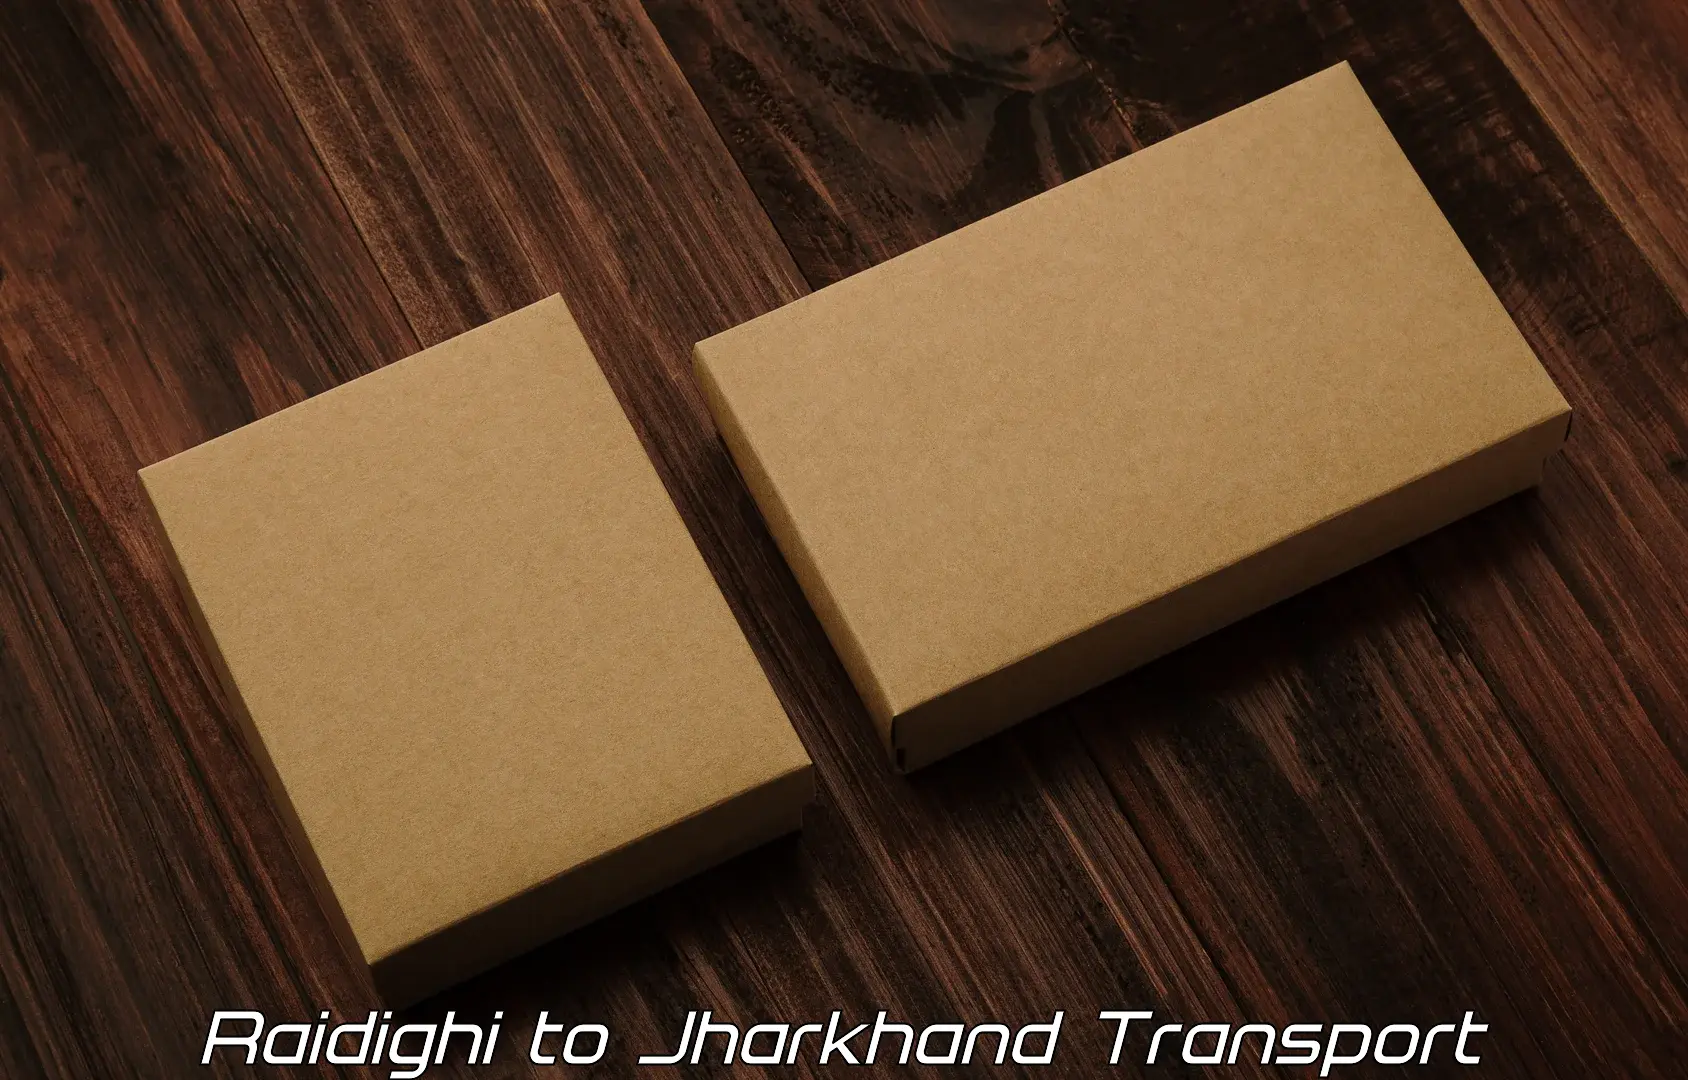 Land transport services Raidighi to Jharkhand